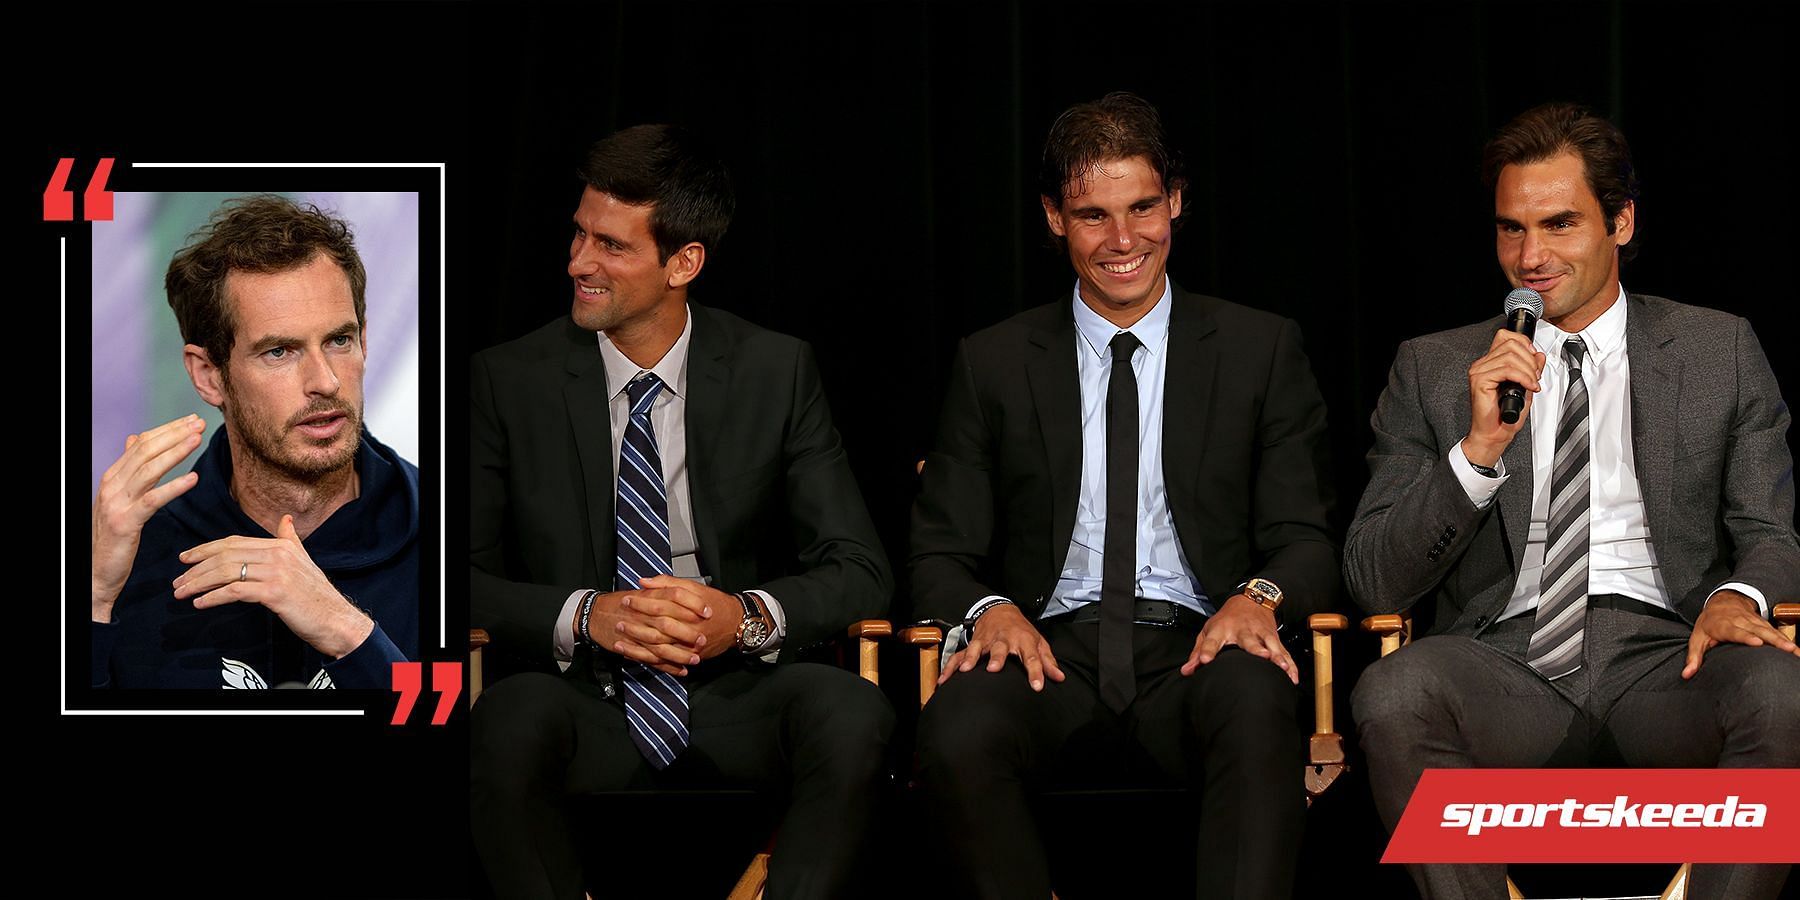 Andy Murray has hailed the Big 3 of Federer, Nadal and Djokovic